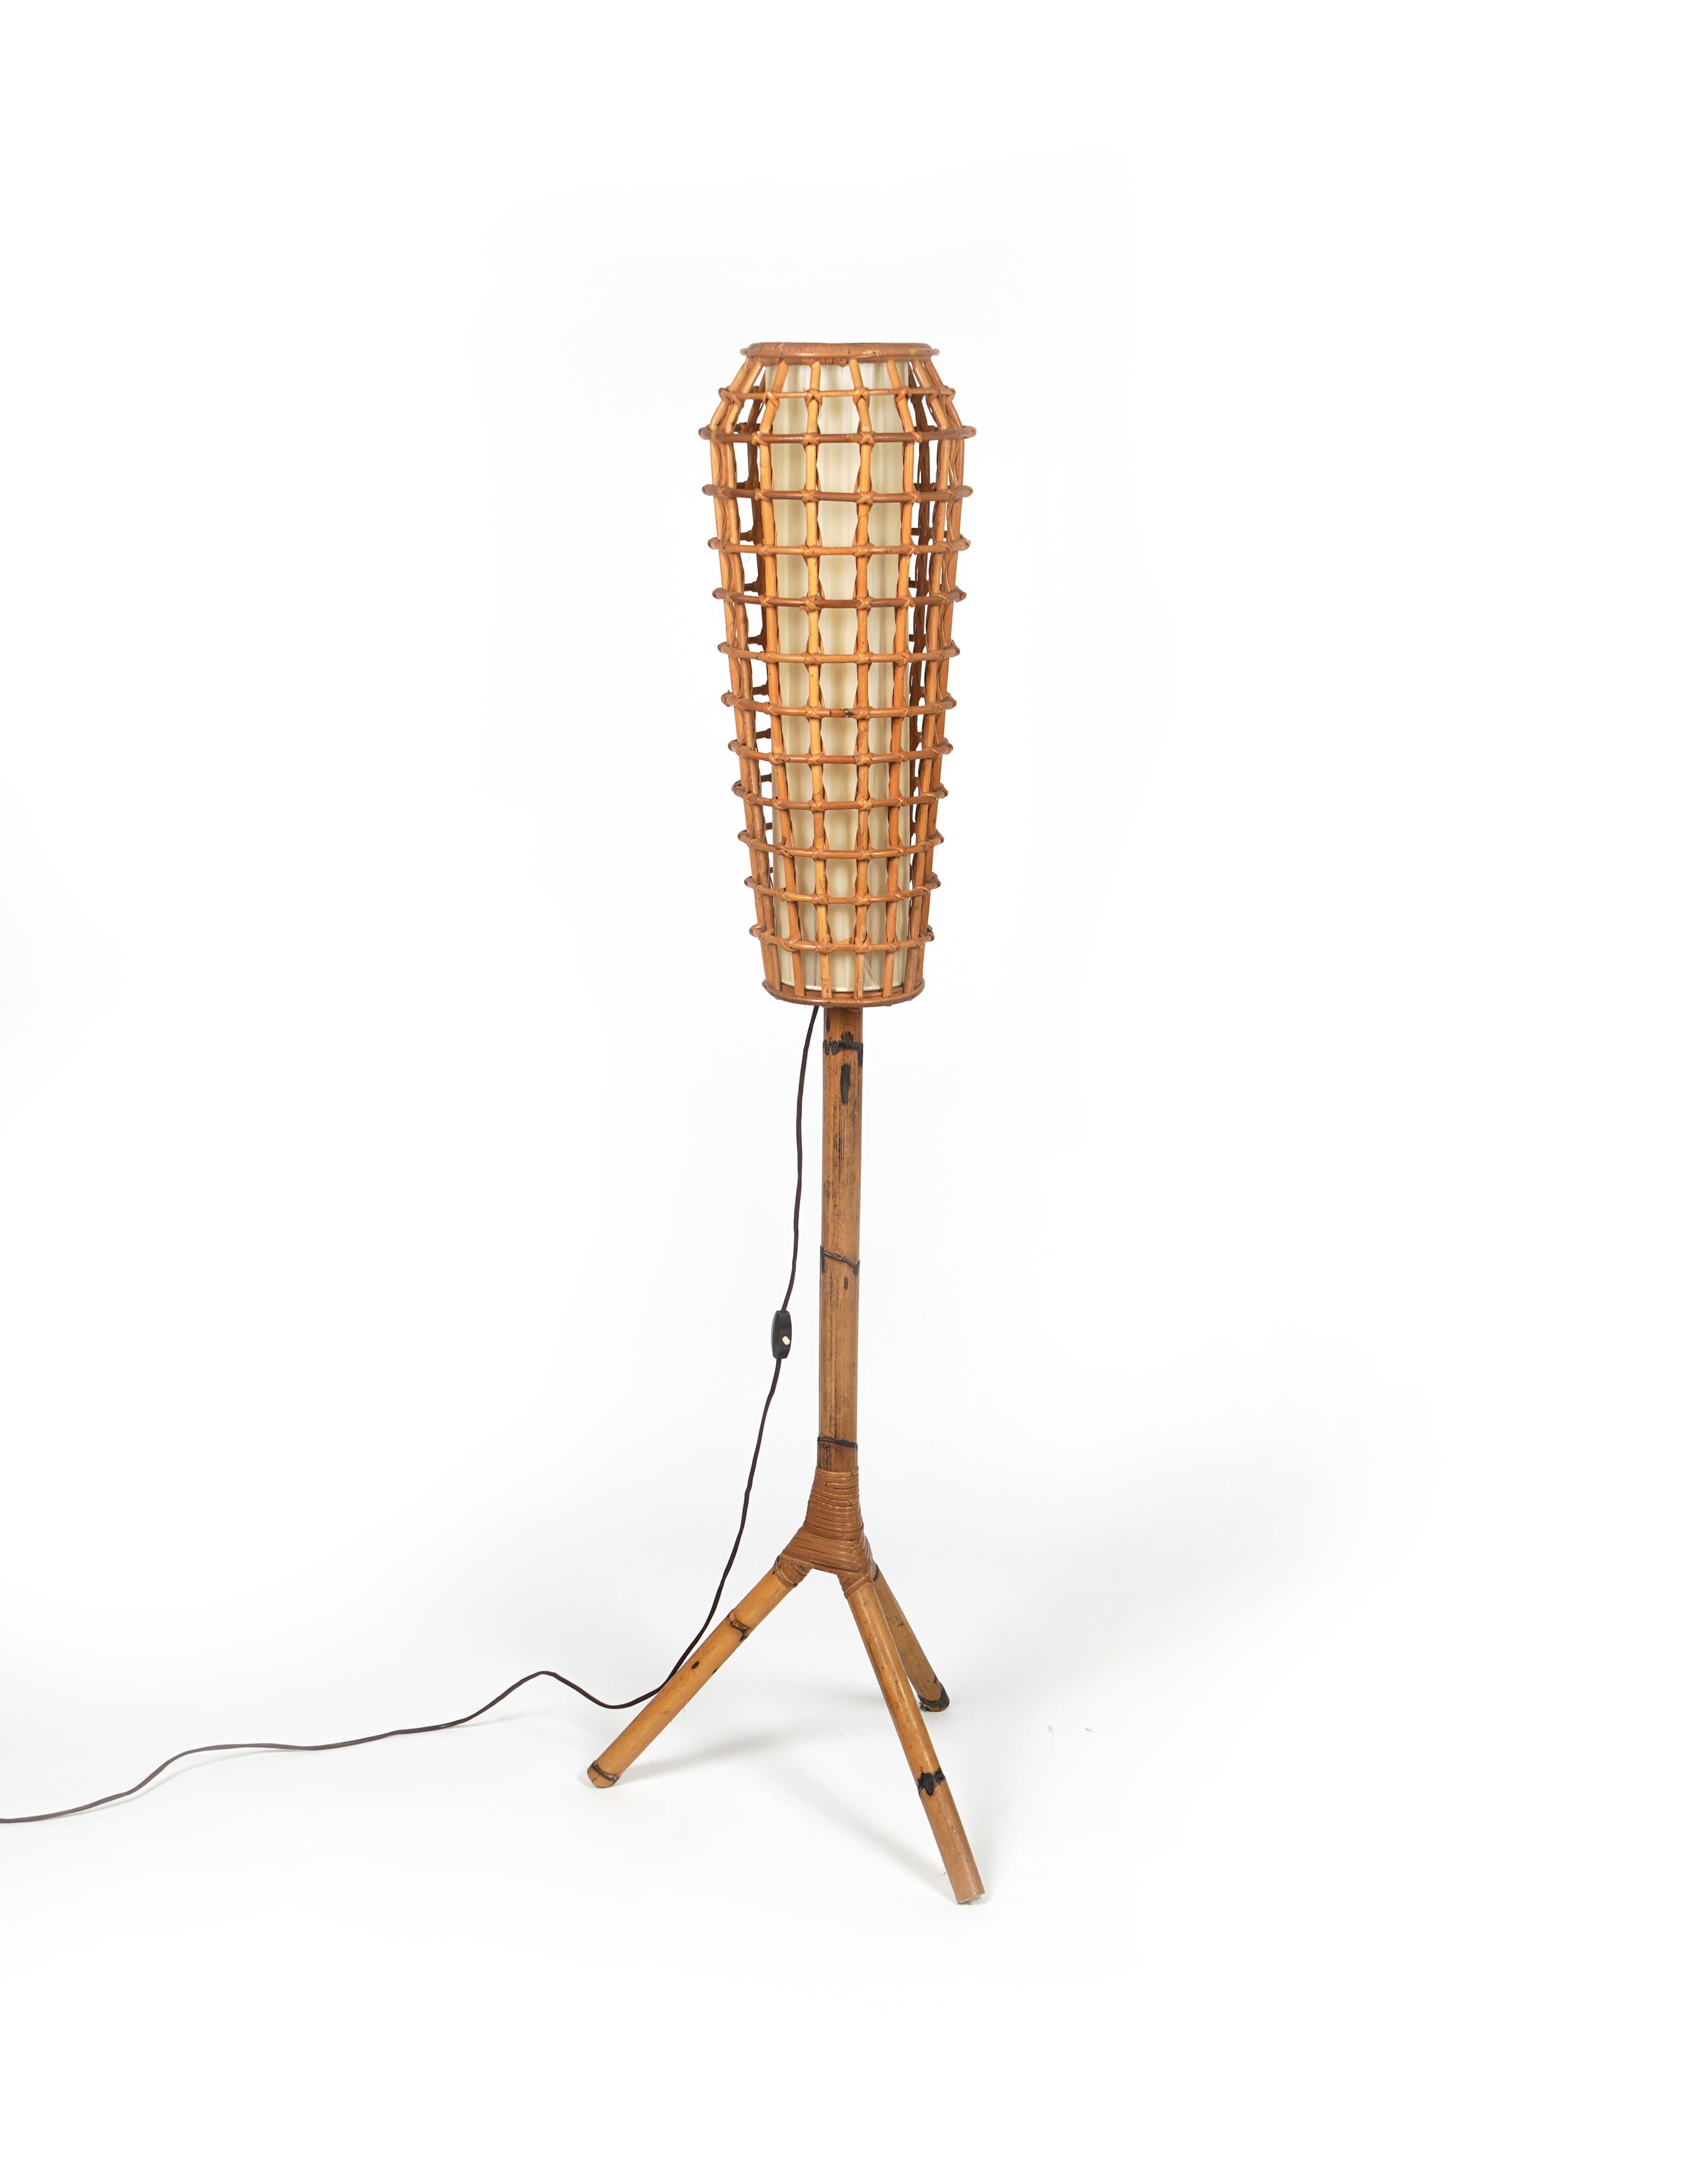 Mid-Century Modern Midcentury Rattan and Bamboo Floor Lamp Franco Albini Style, Italy, 1960s For Sale